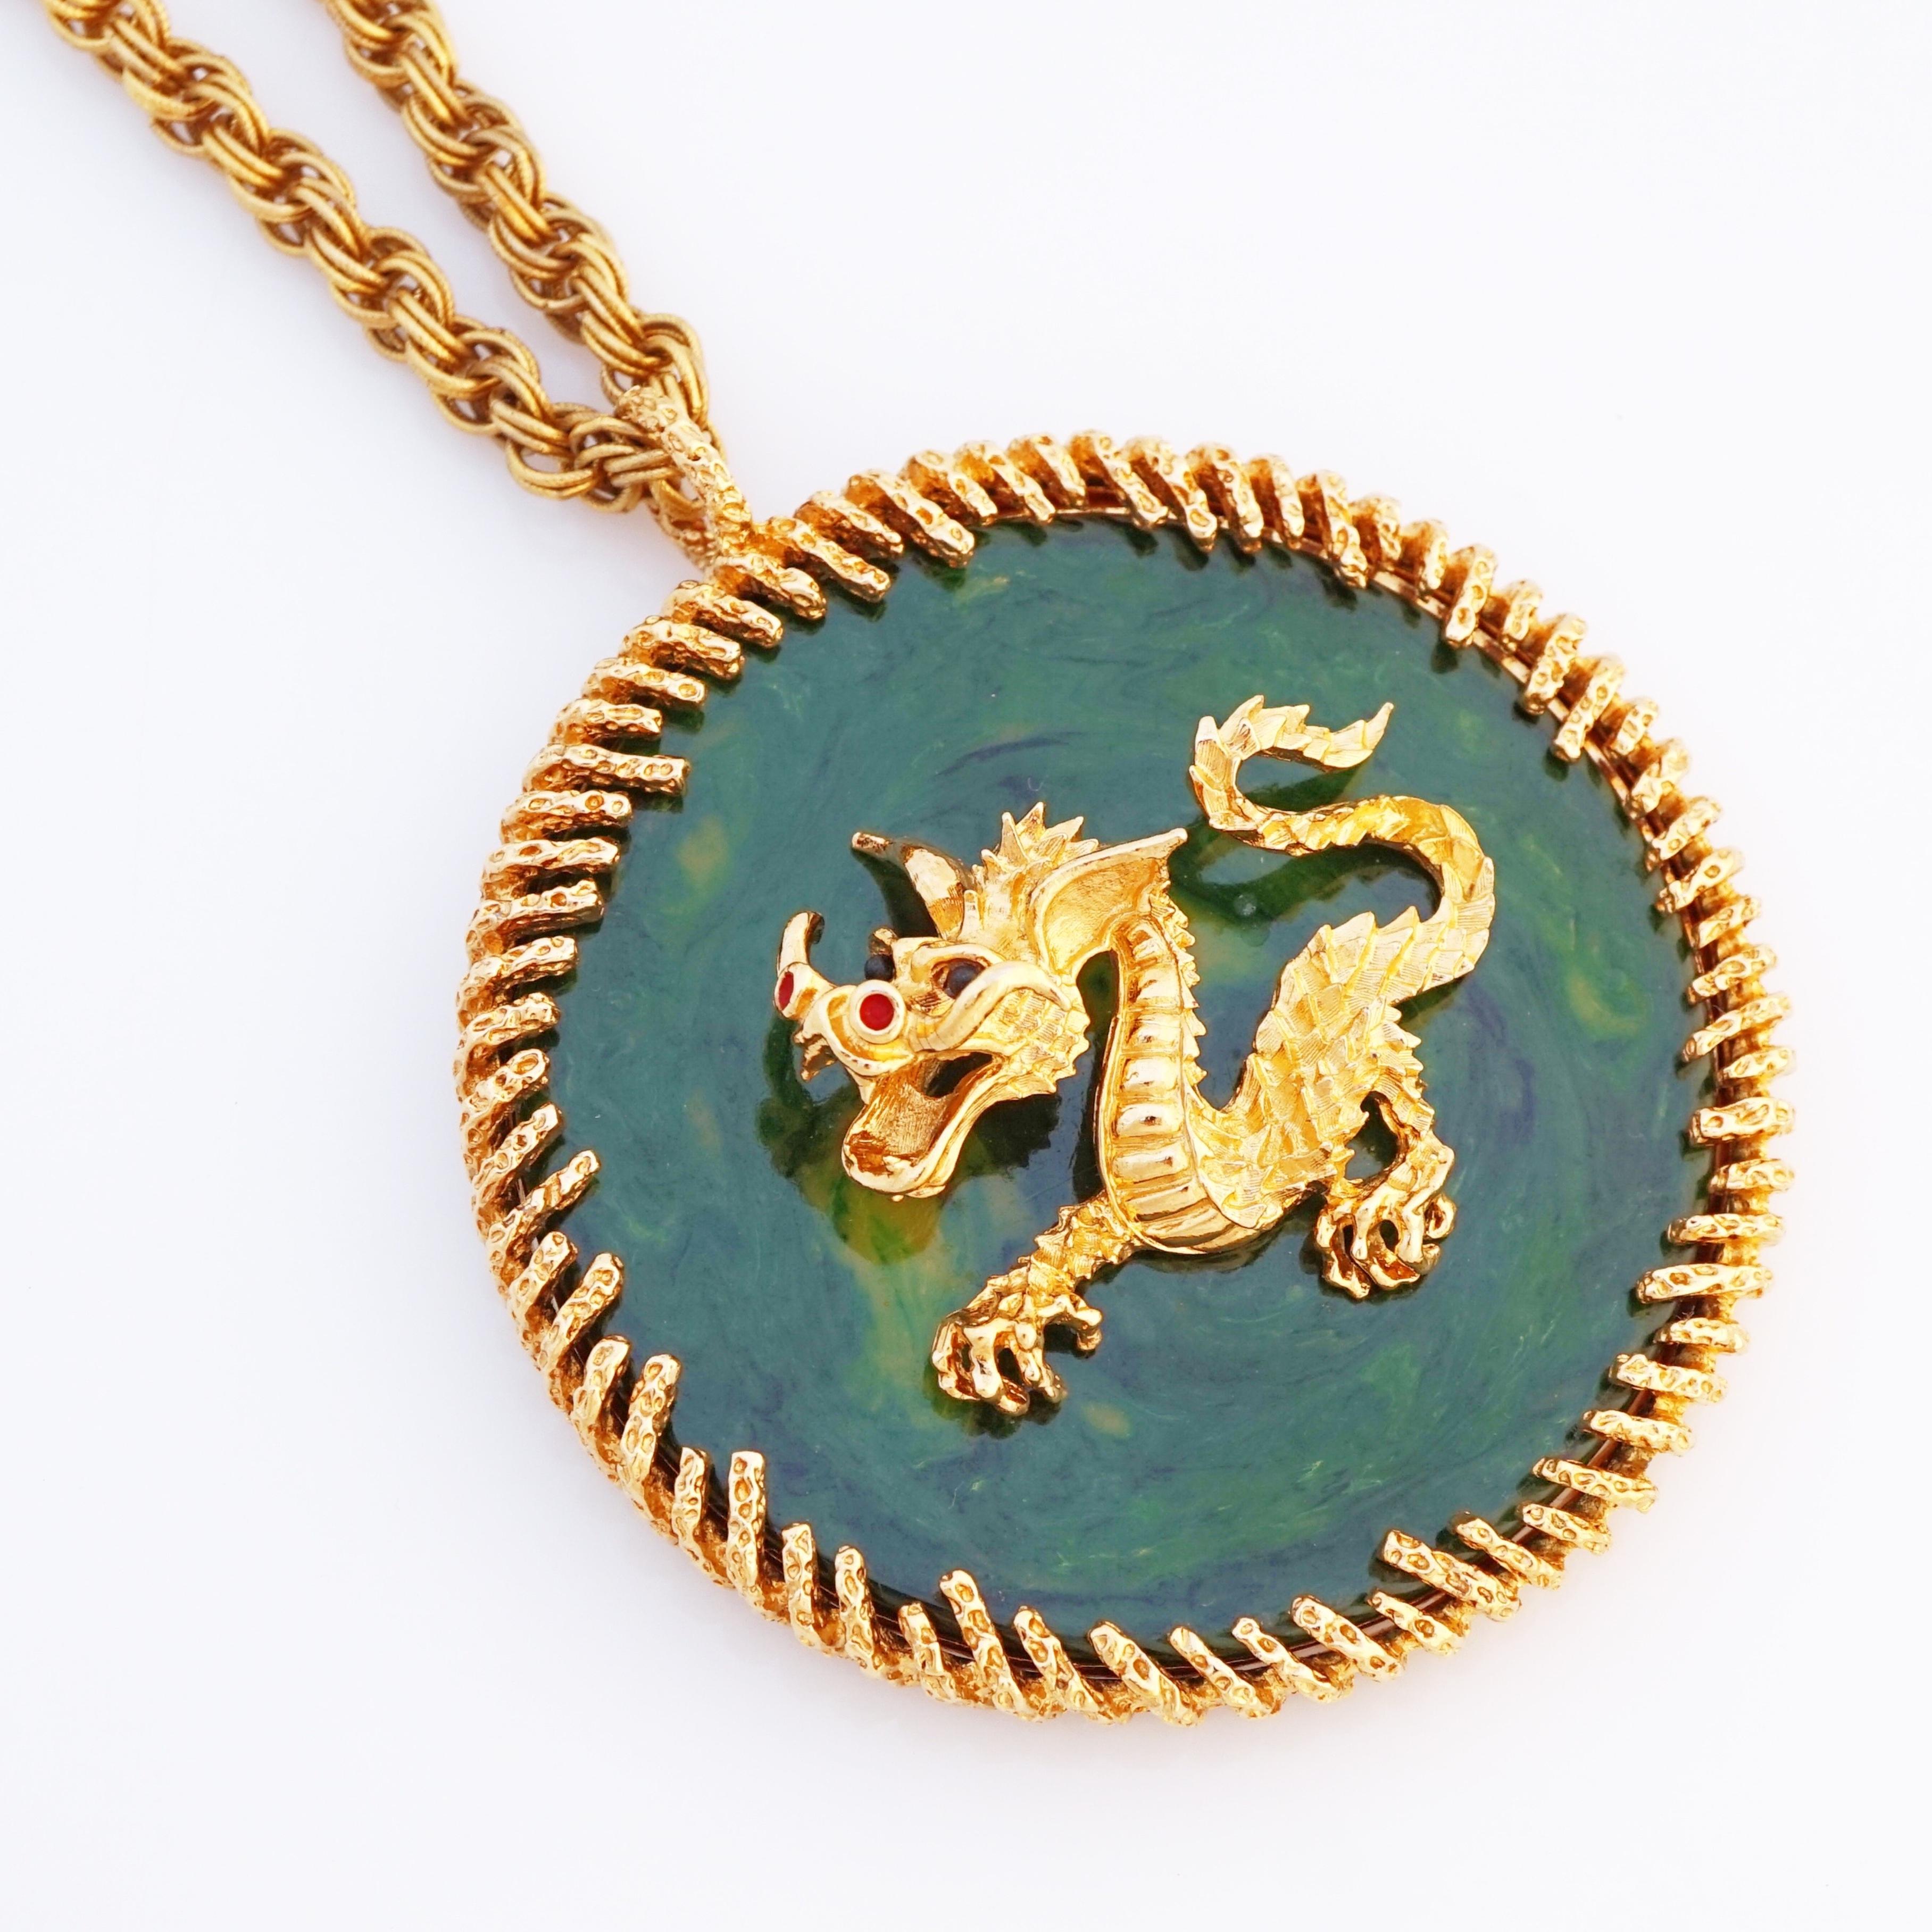 Modern Massive Runway Jade Resin Dragon Pendant Necklace By Panetta, 1970s For Sale